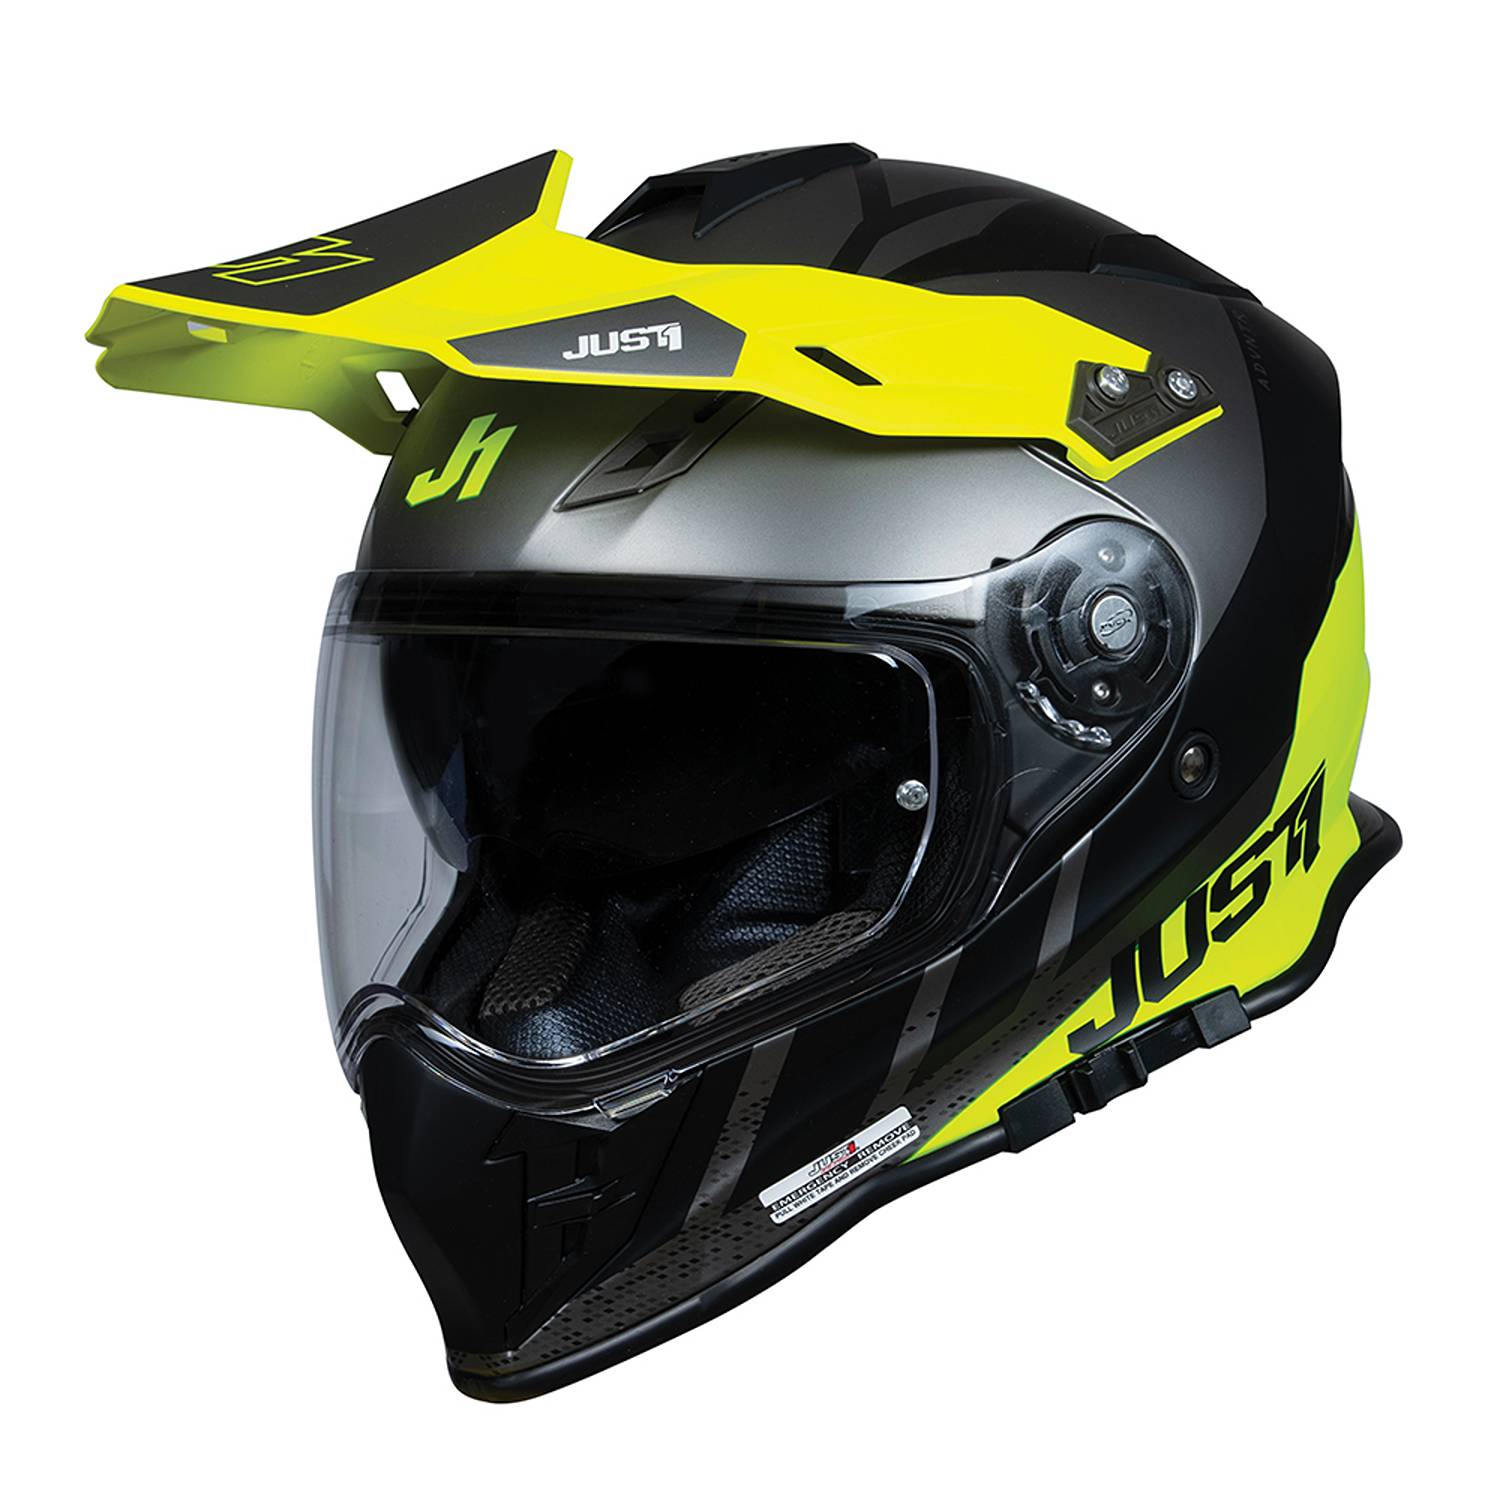 Image of EU Just1 J34 Pro Outerspace Jaune Vert Titane Aventure Casques Taille M